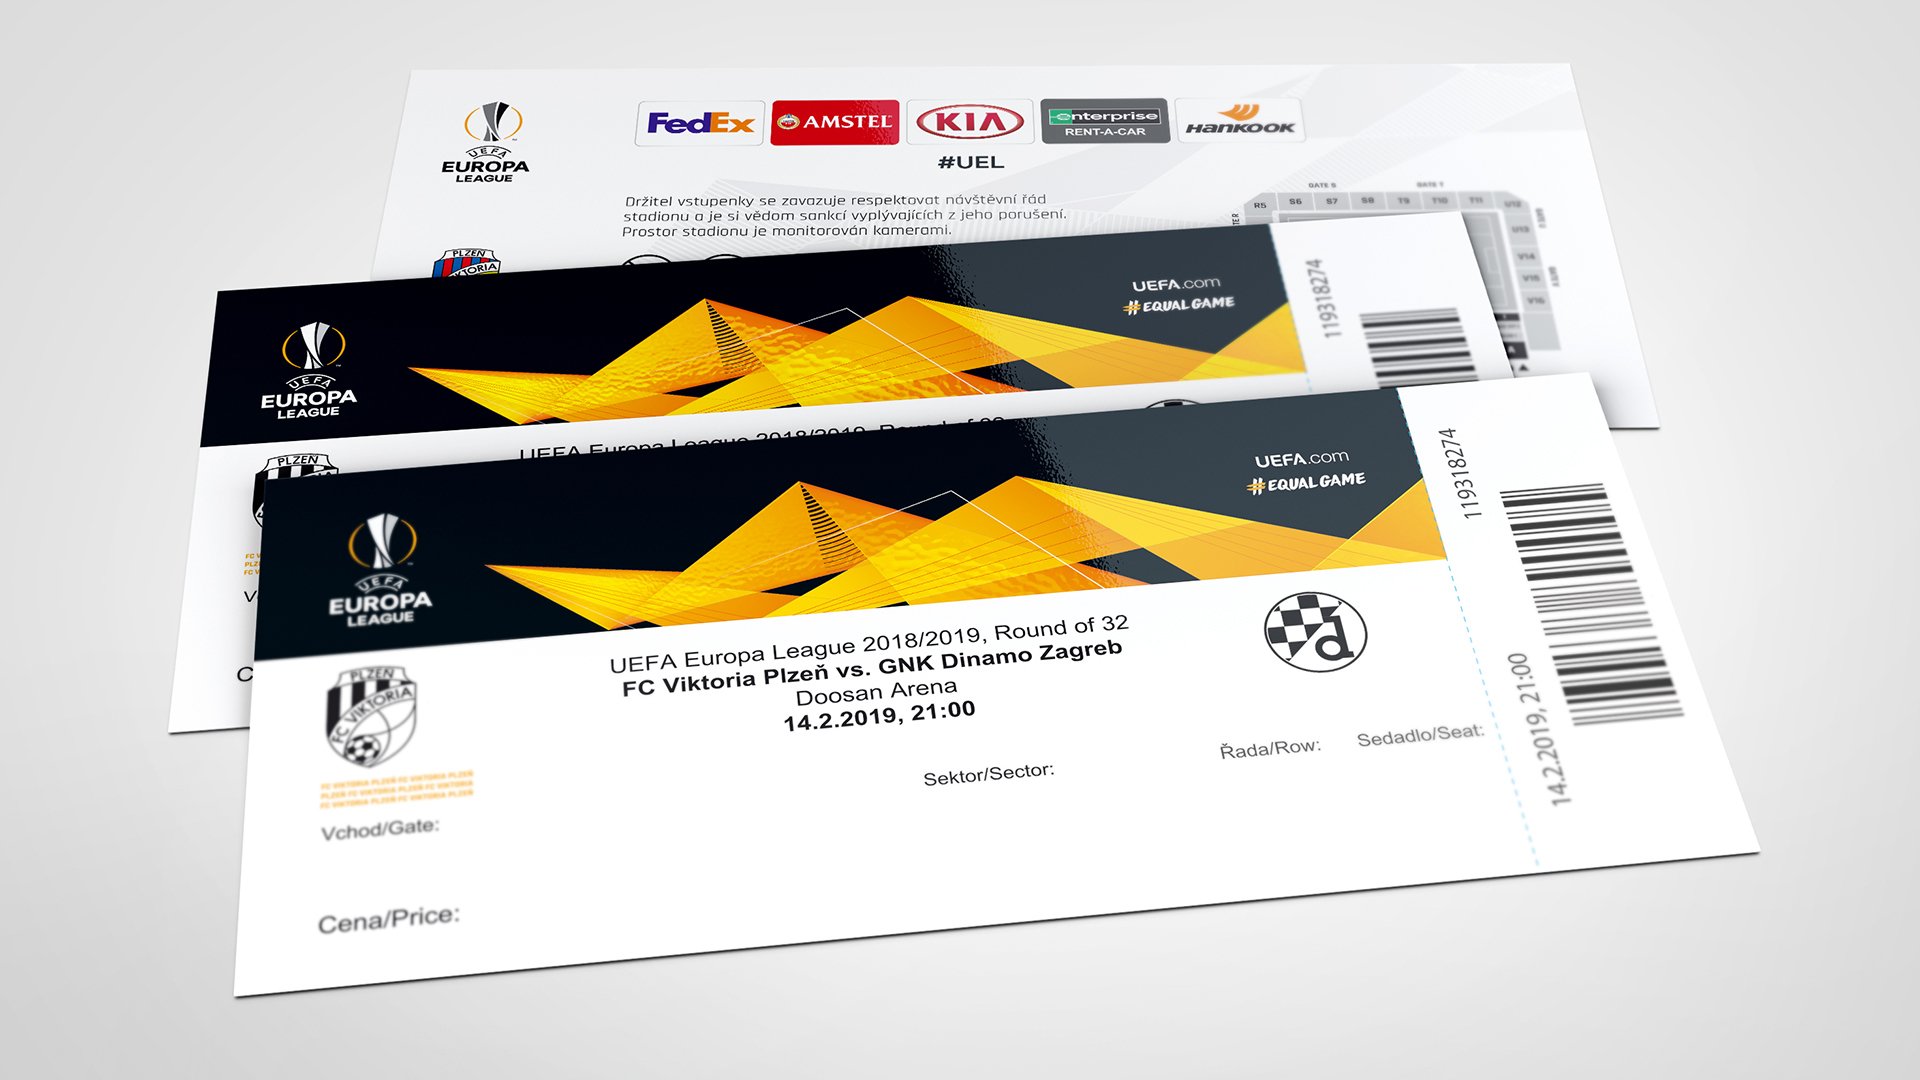 UEFA Europa League is here again! Check all the ticket informations